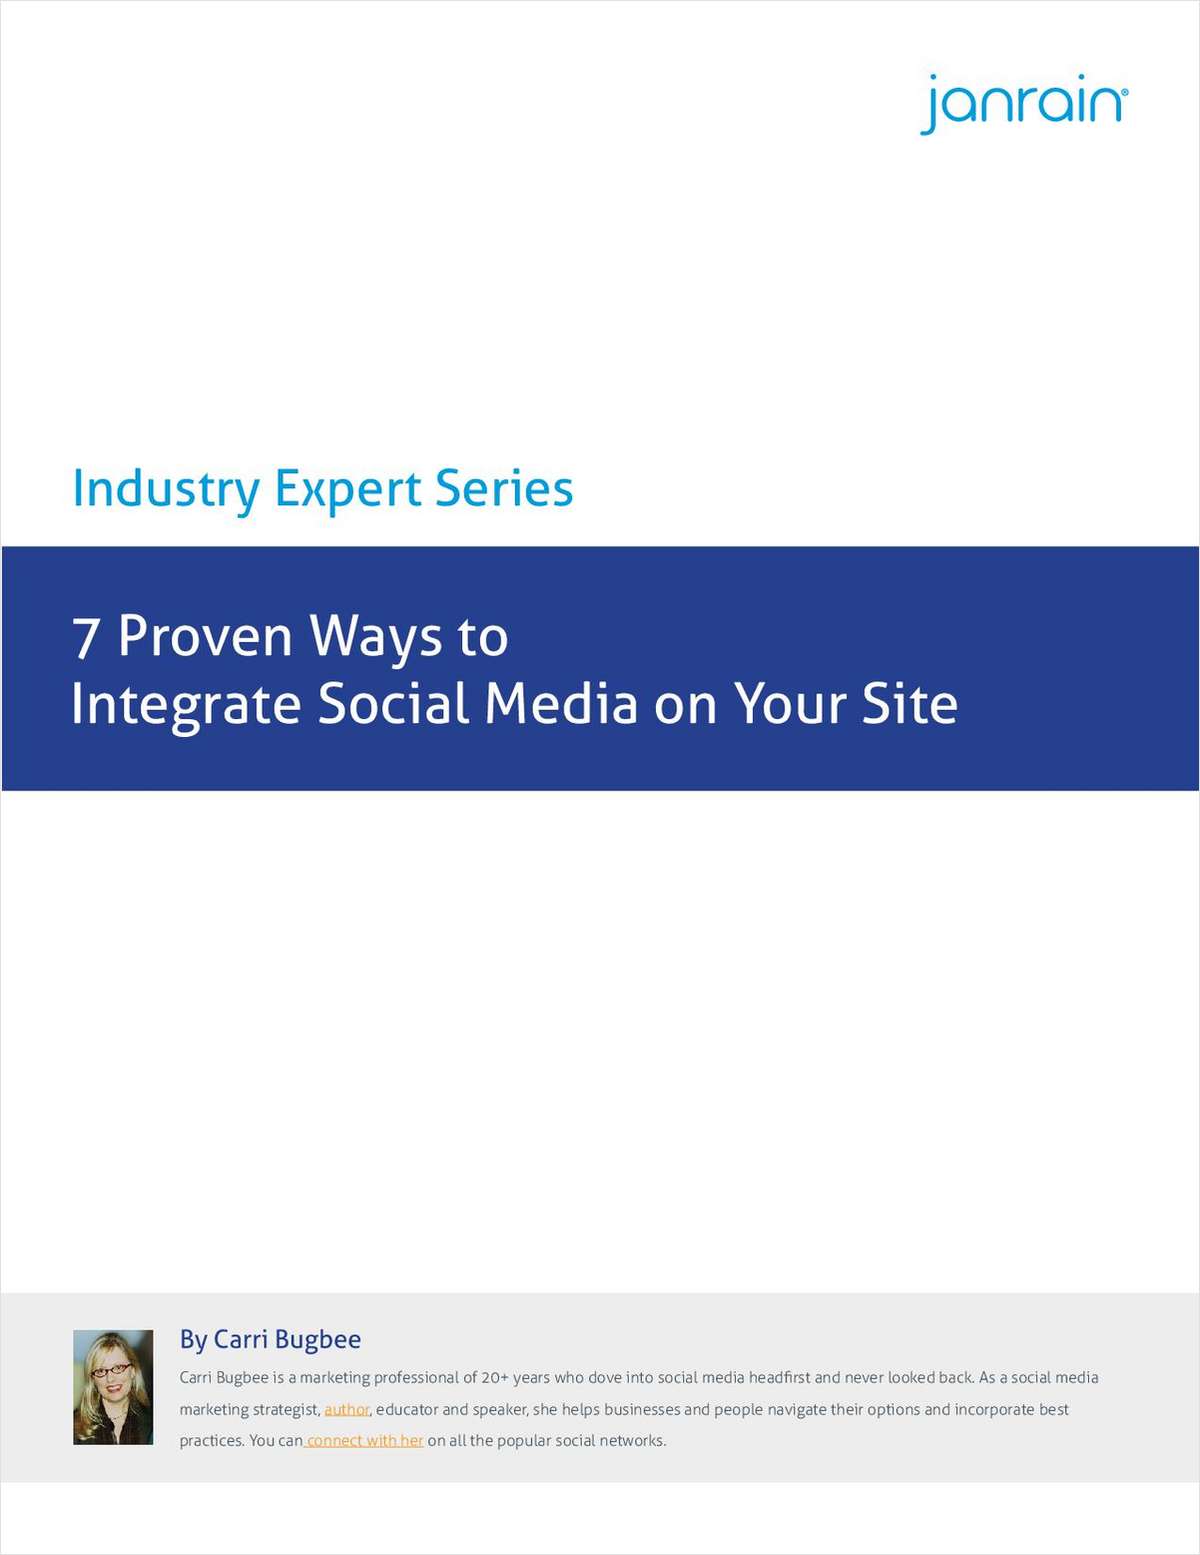 7 Proven Ways to Integrate Social Media with Your Site